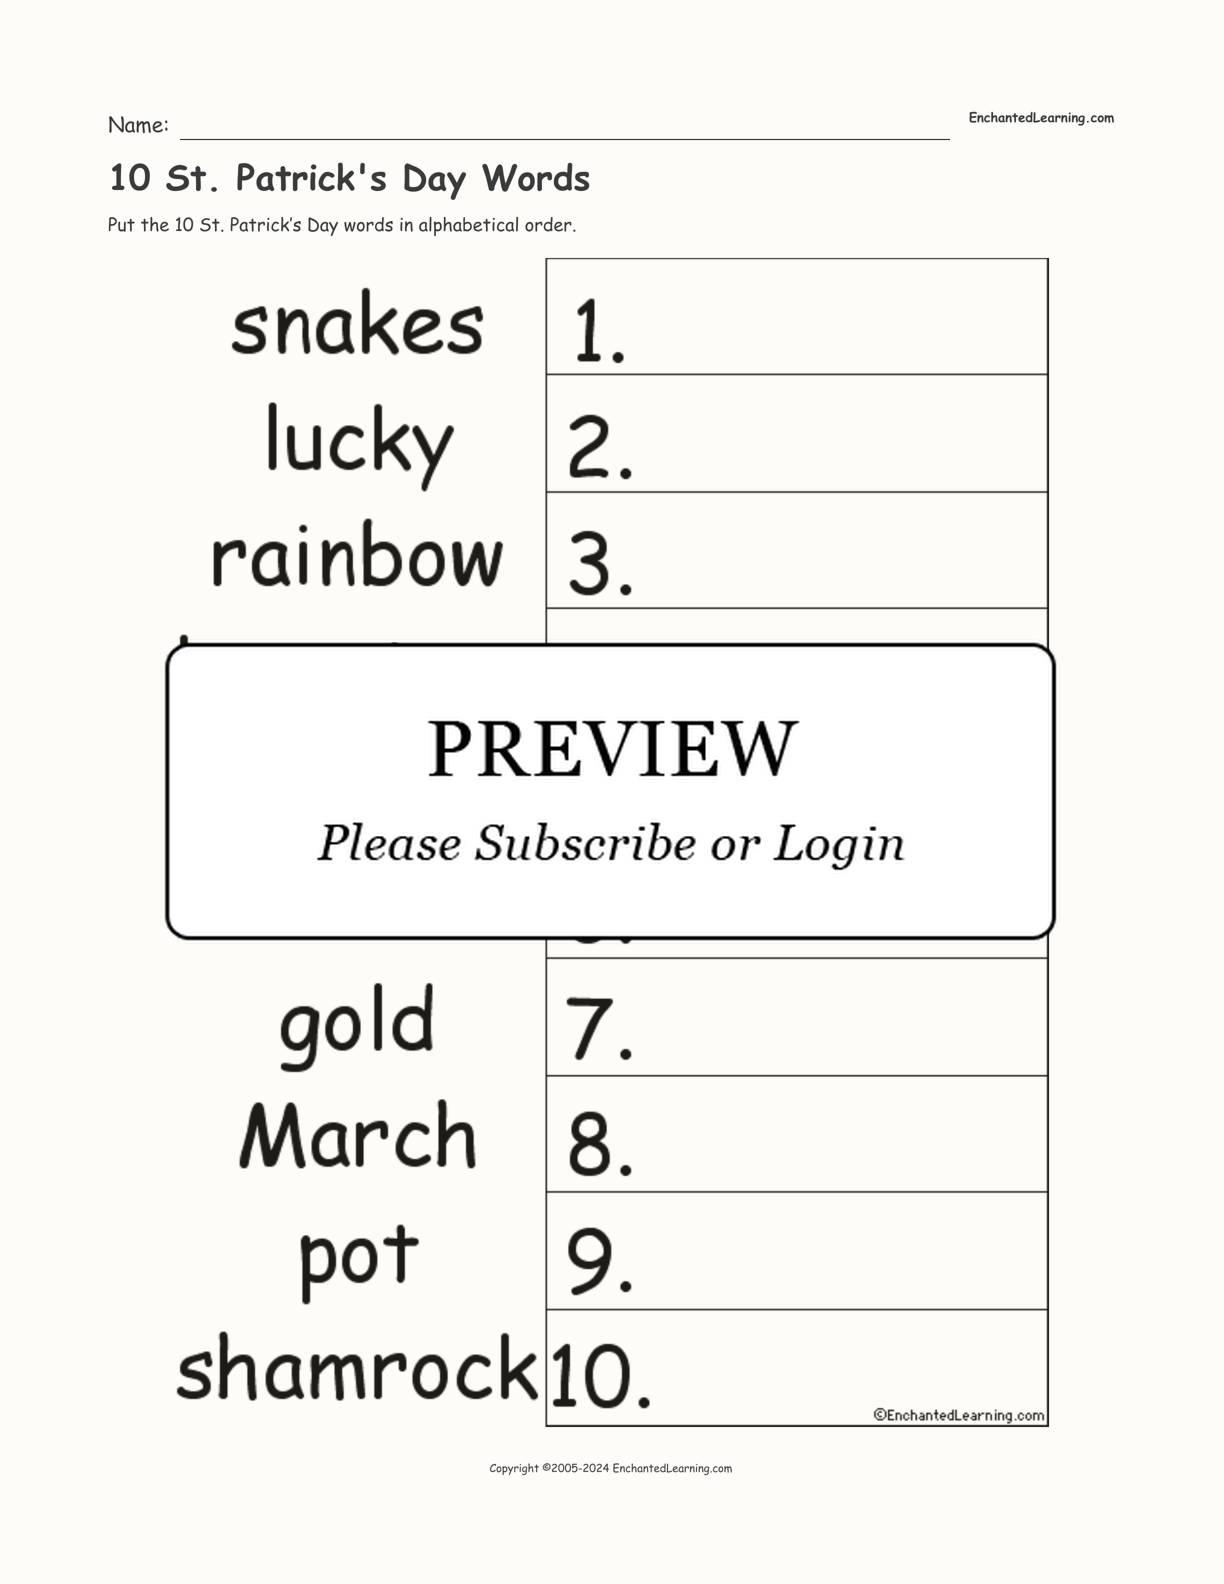 10 St. Patrick's Day Words interactive worksheet page 1